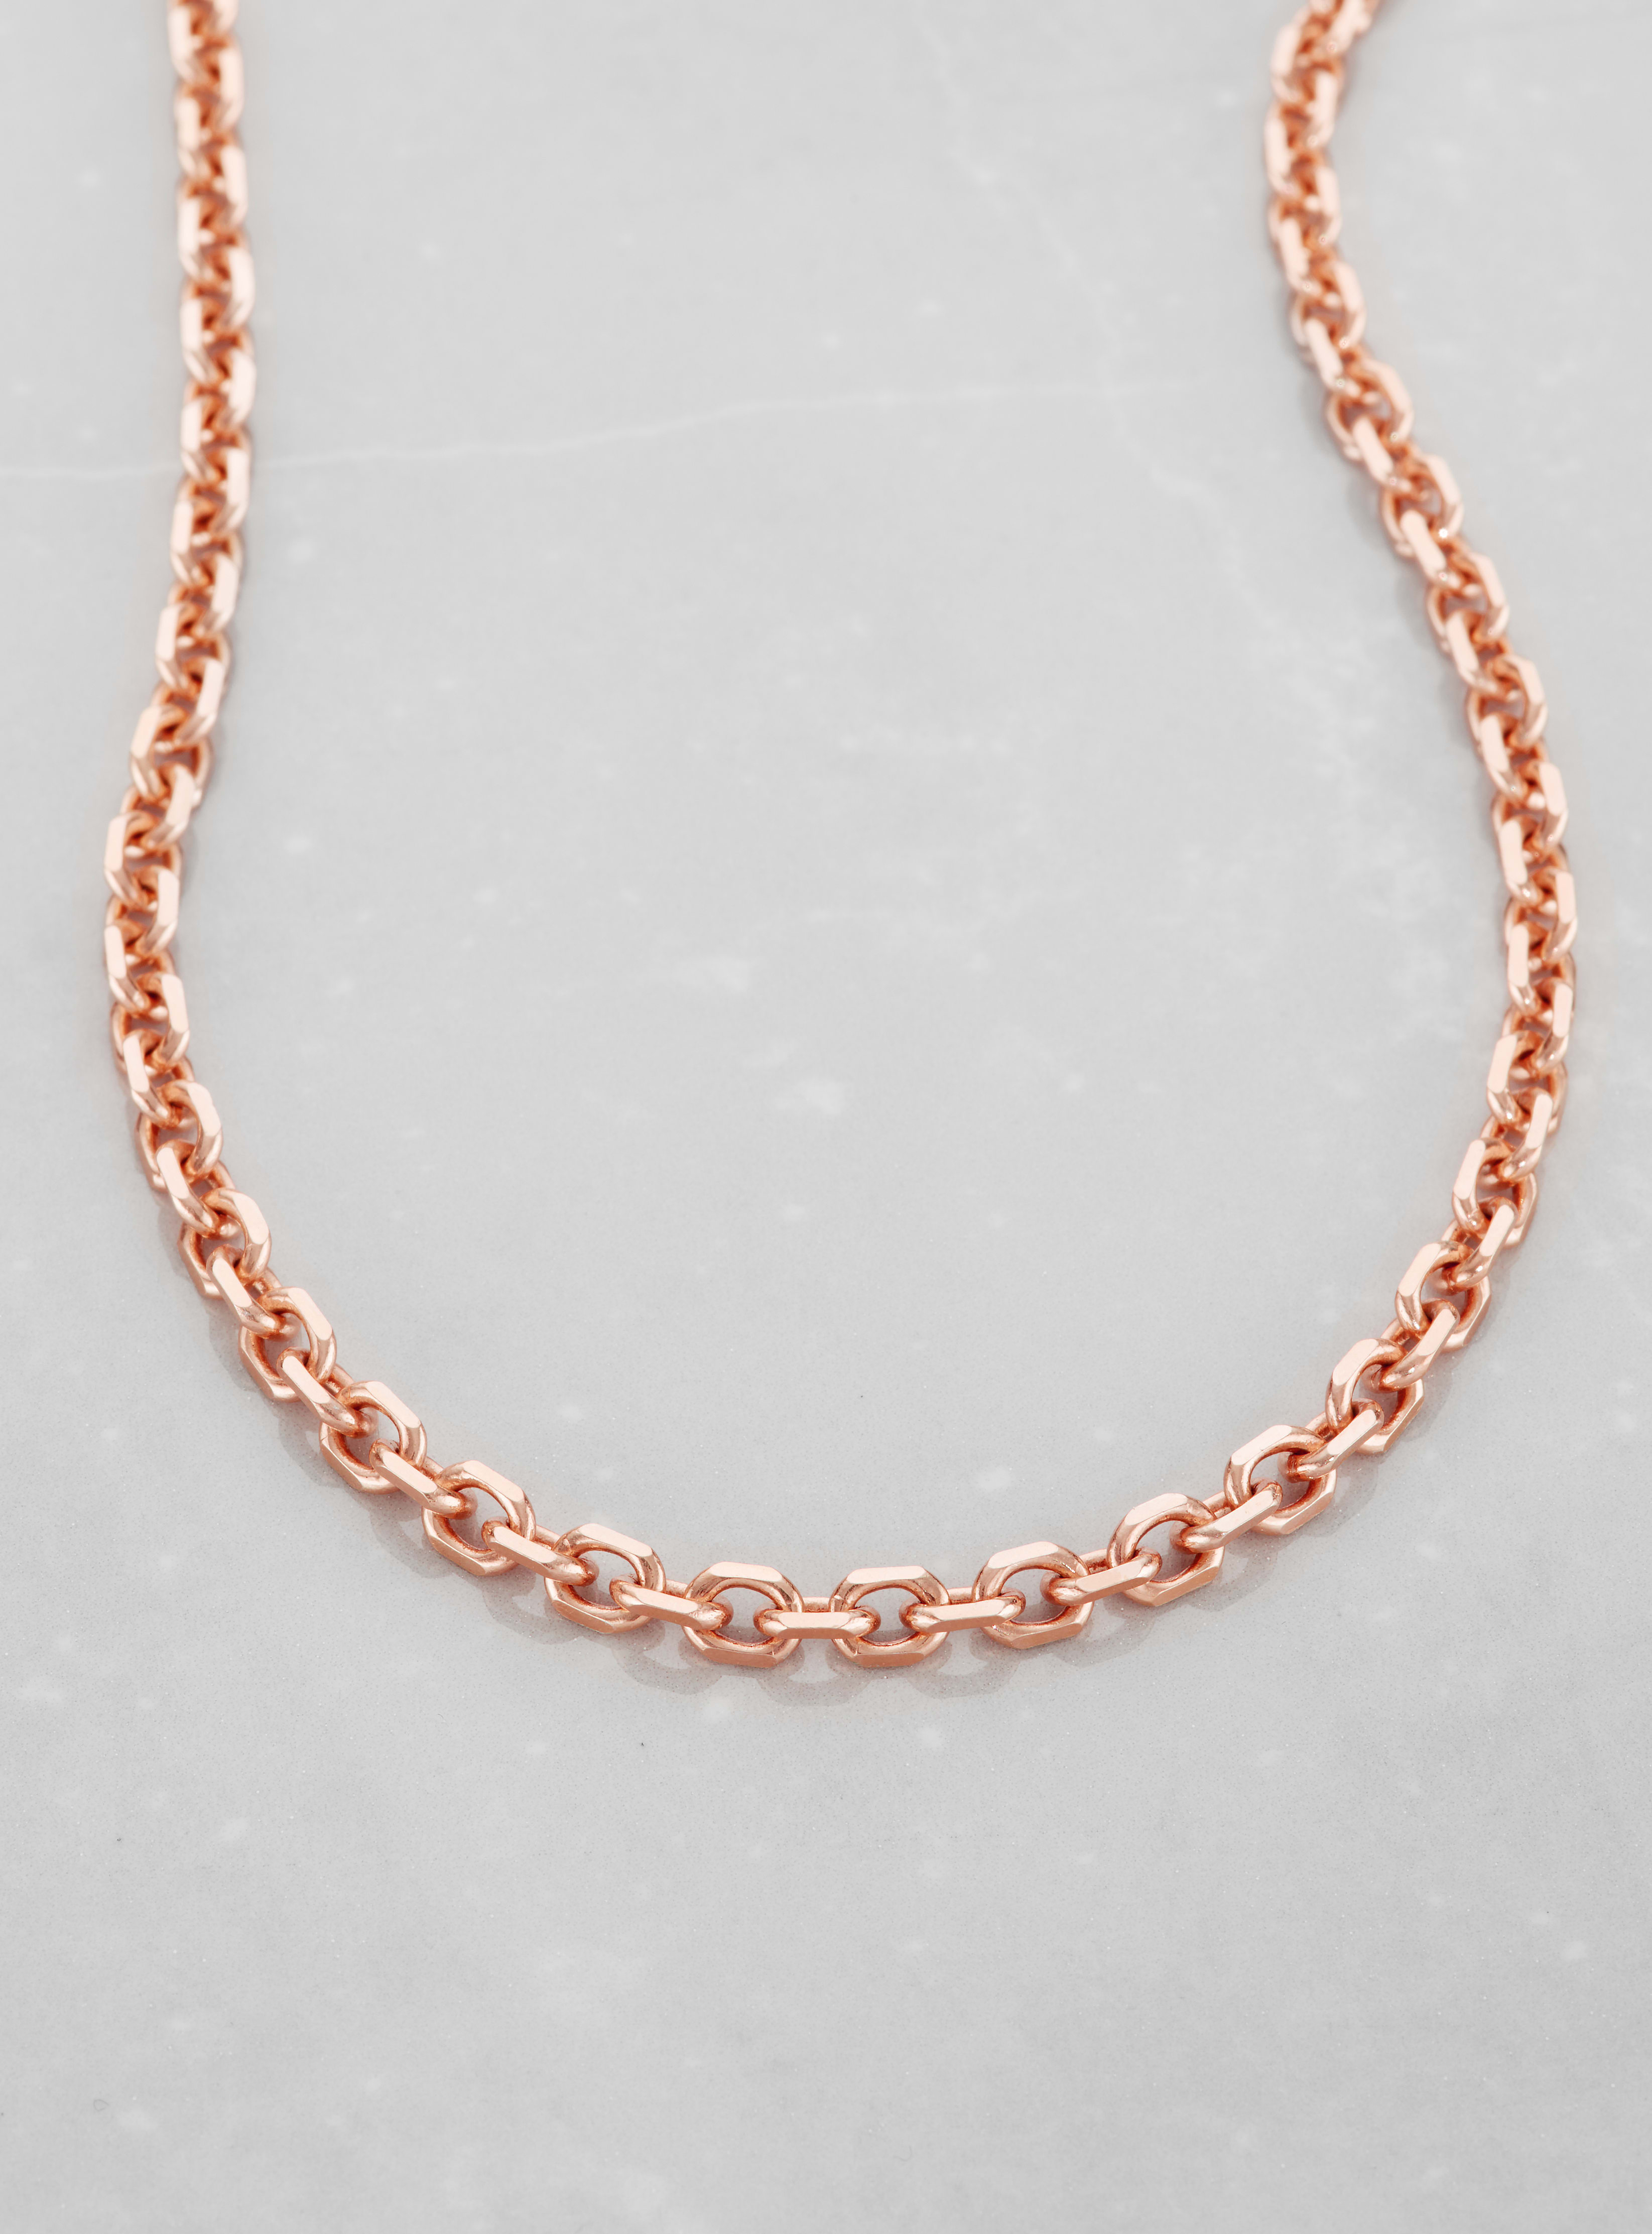 Image Cable Chain - 2mm Rose Gold - Higher Quality Standards